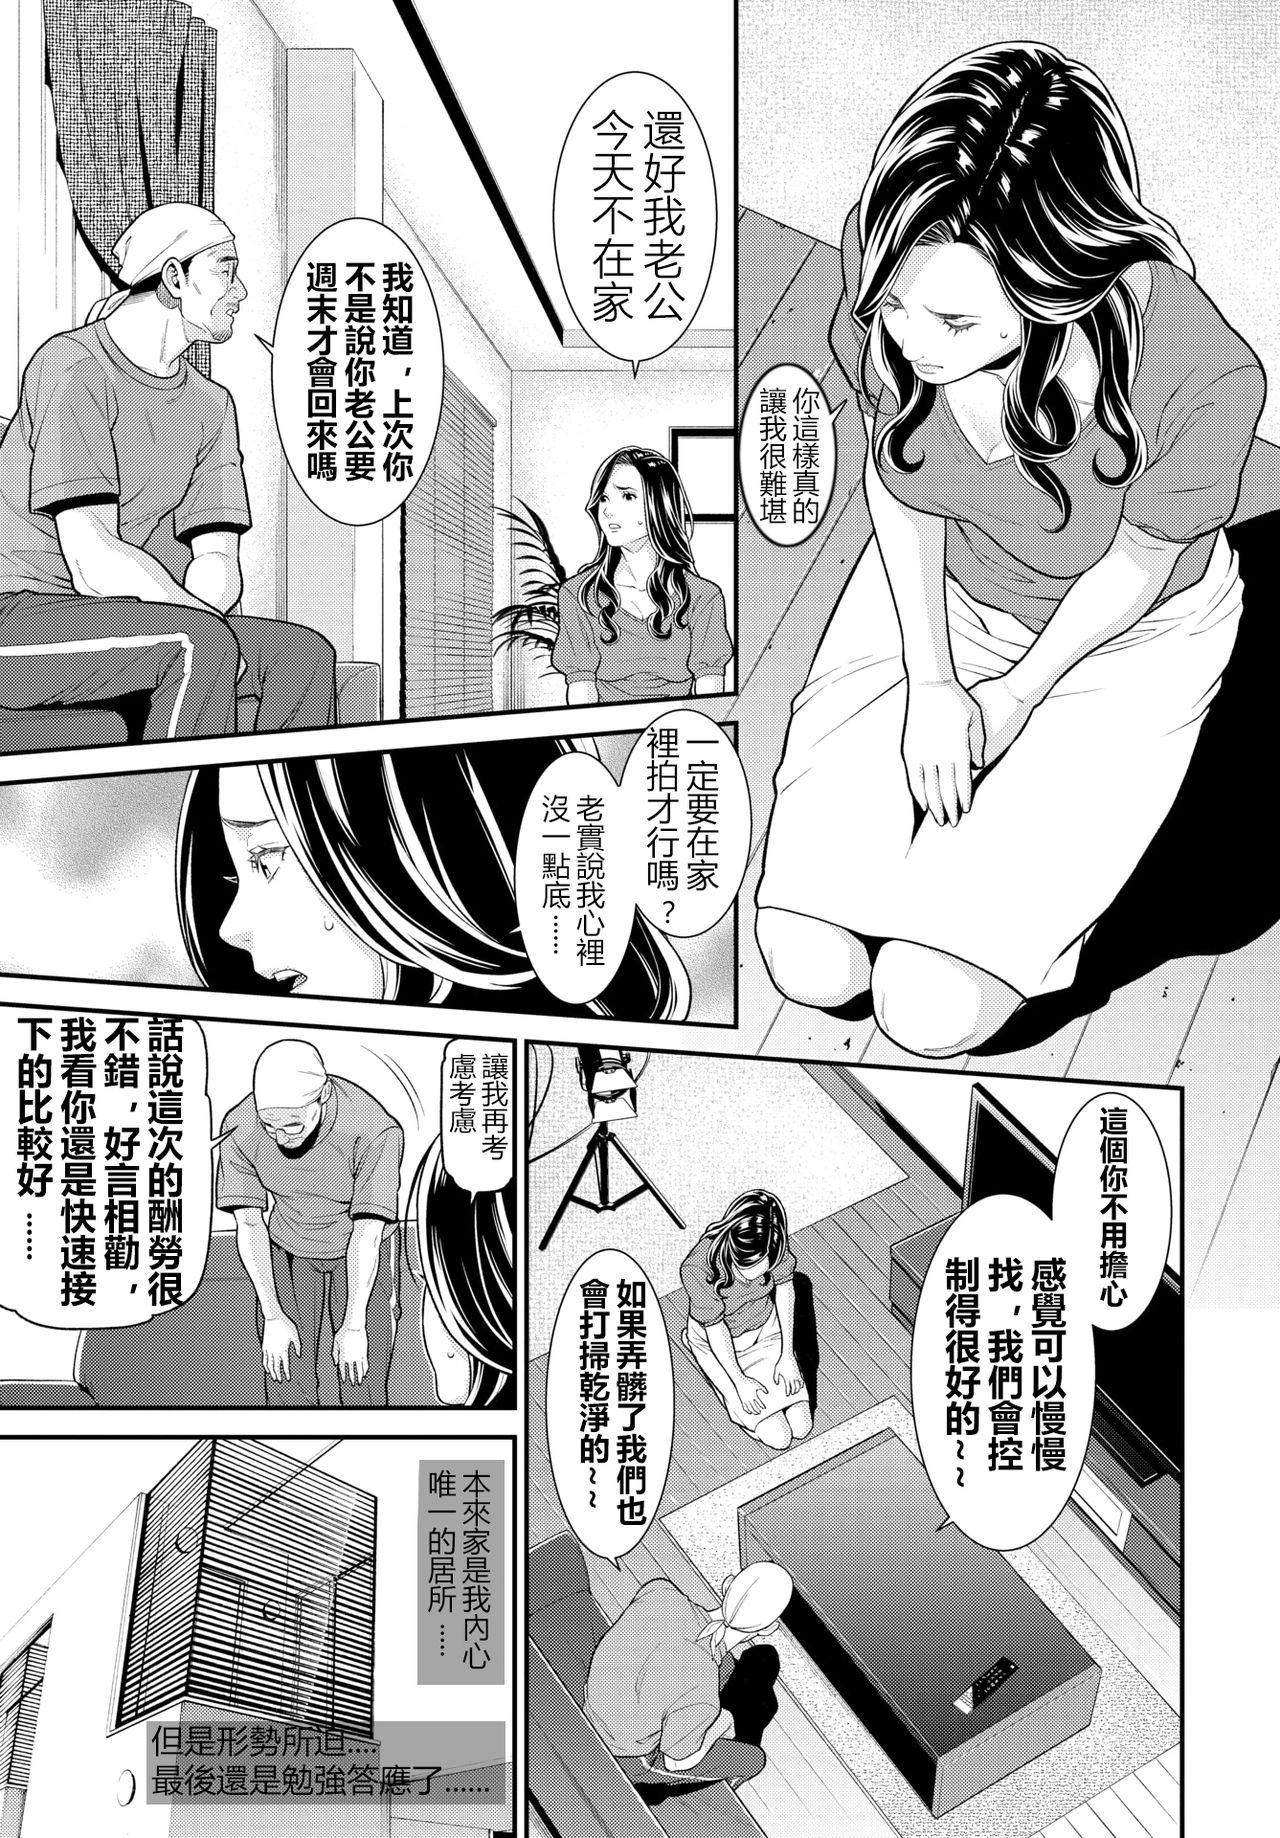 End of the Secret Wife 1-6 (no-code version) 鼠灣漢化 (210214 update) 極品人妻 NTR (117 pages)-第1章-图片54